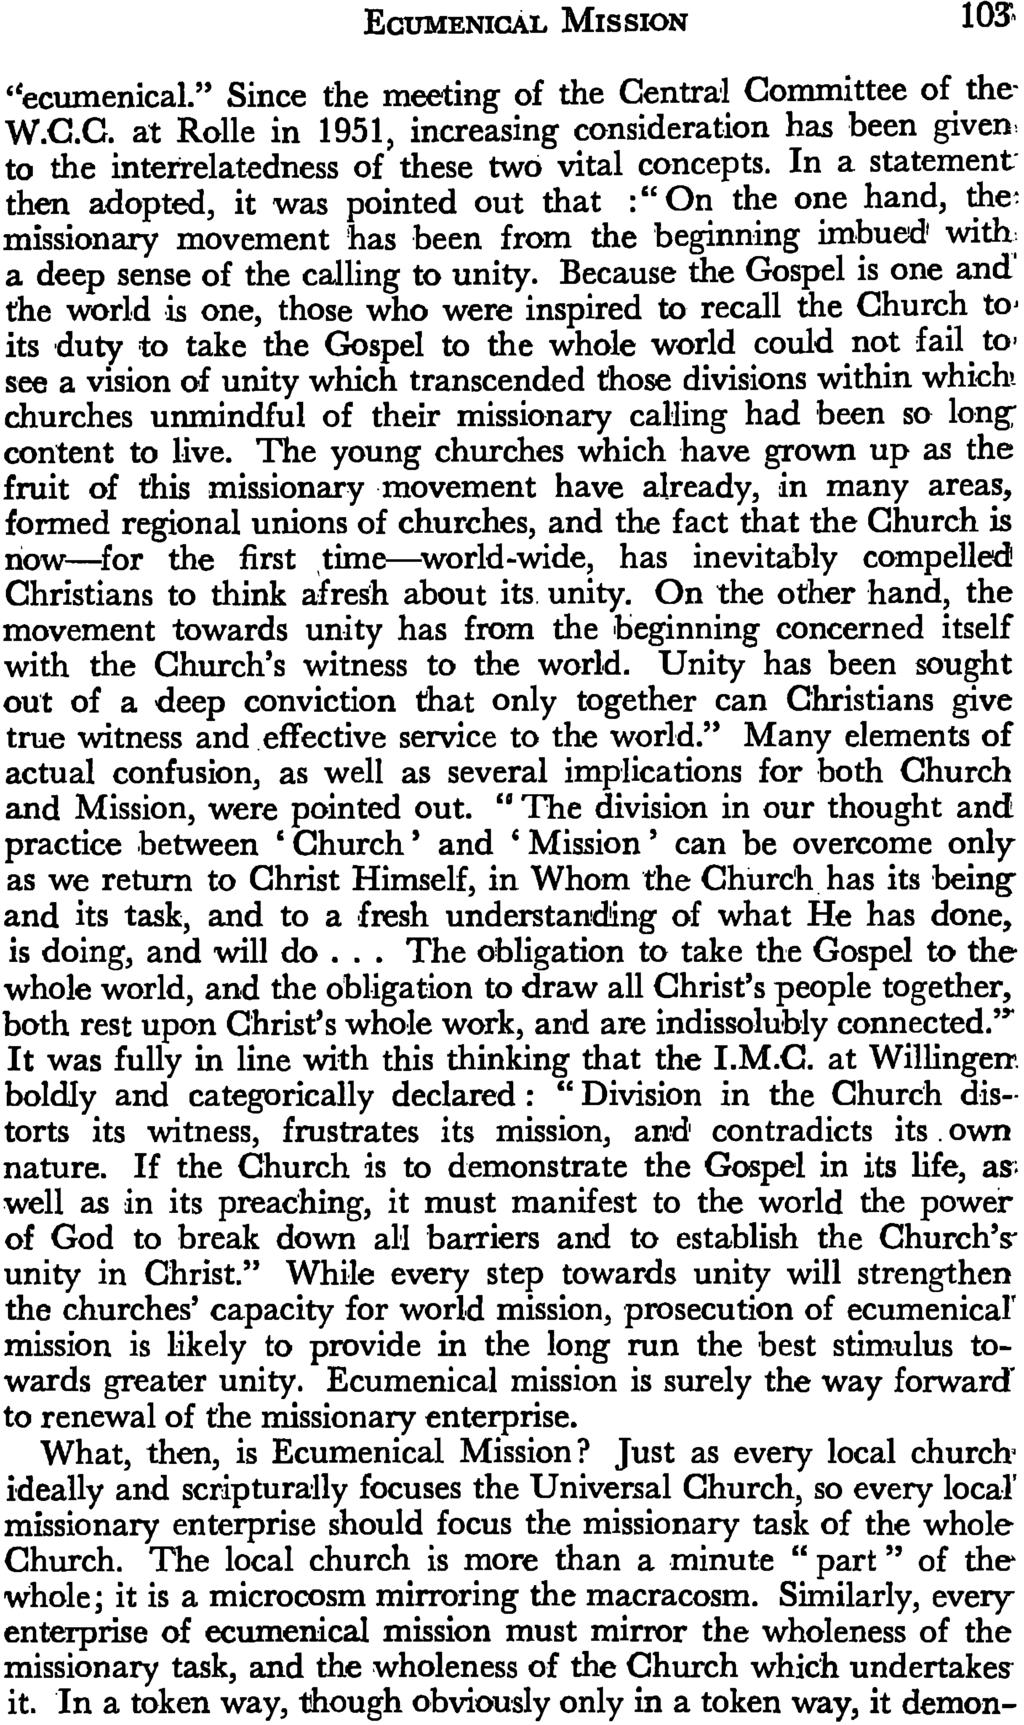 ECUMENIcAL MISSION 103', "ecumenical." Since the meeting of the Central Committee of the W.C.C. at Rolle in 1951, increasing consideration has been given, to the interrelatedness of these two vital concepts.